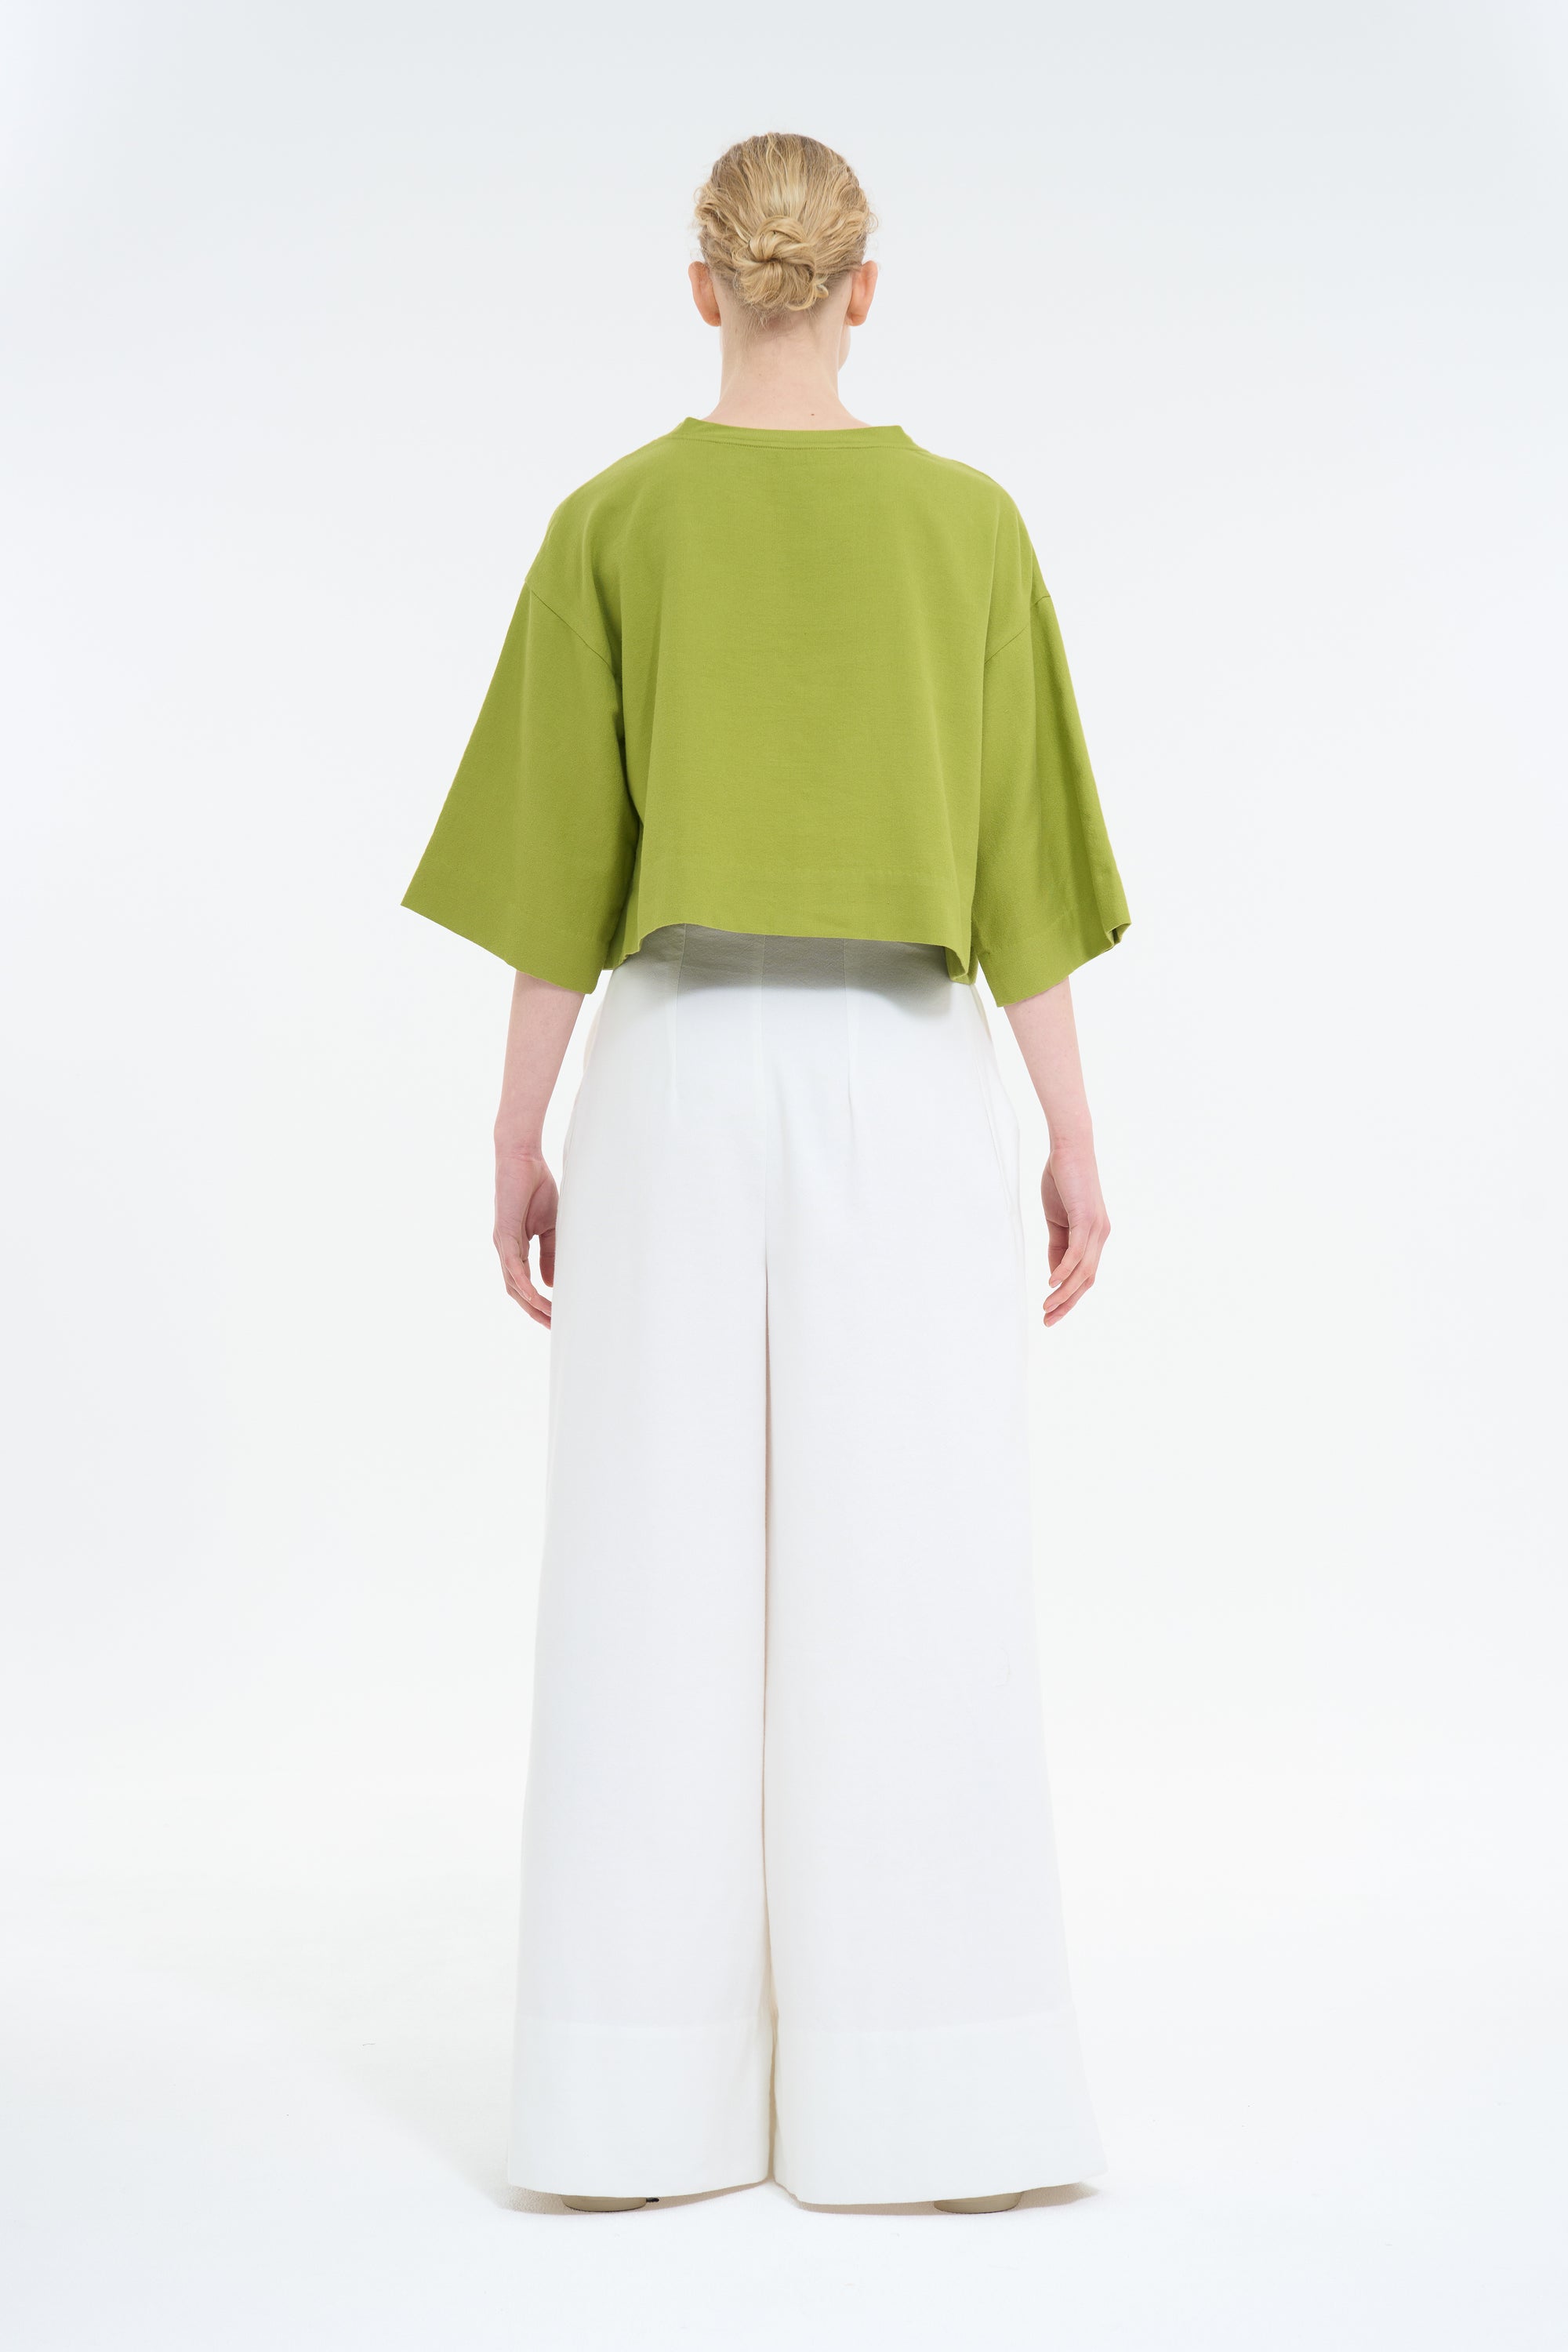 CROPPED T-SHIRT : LIME